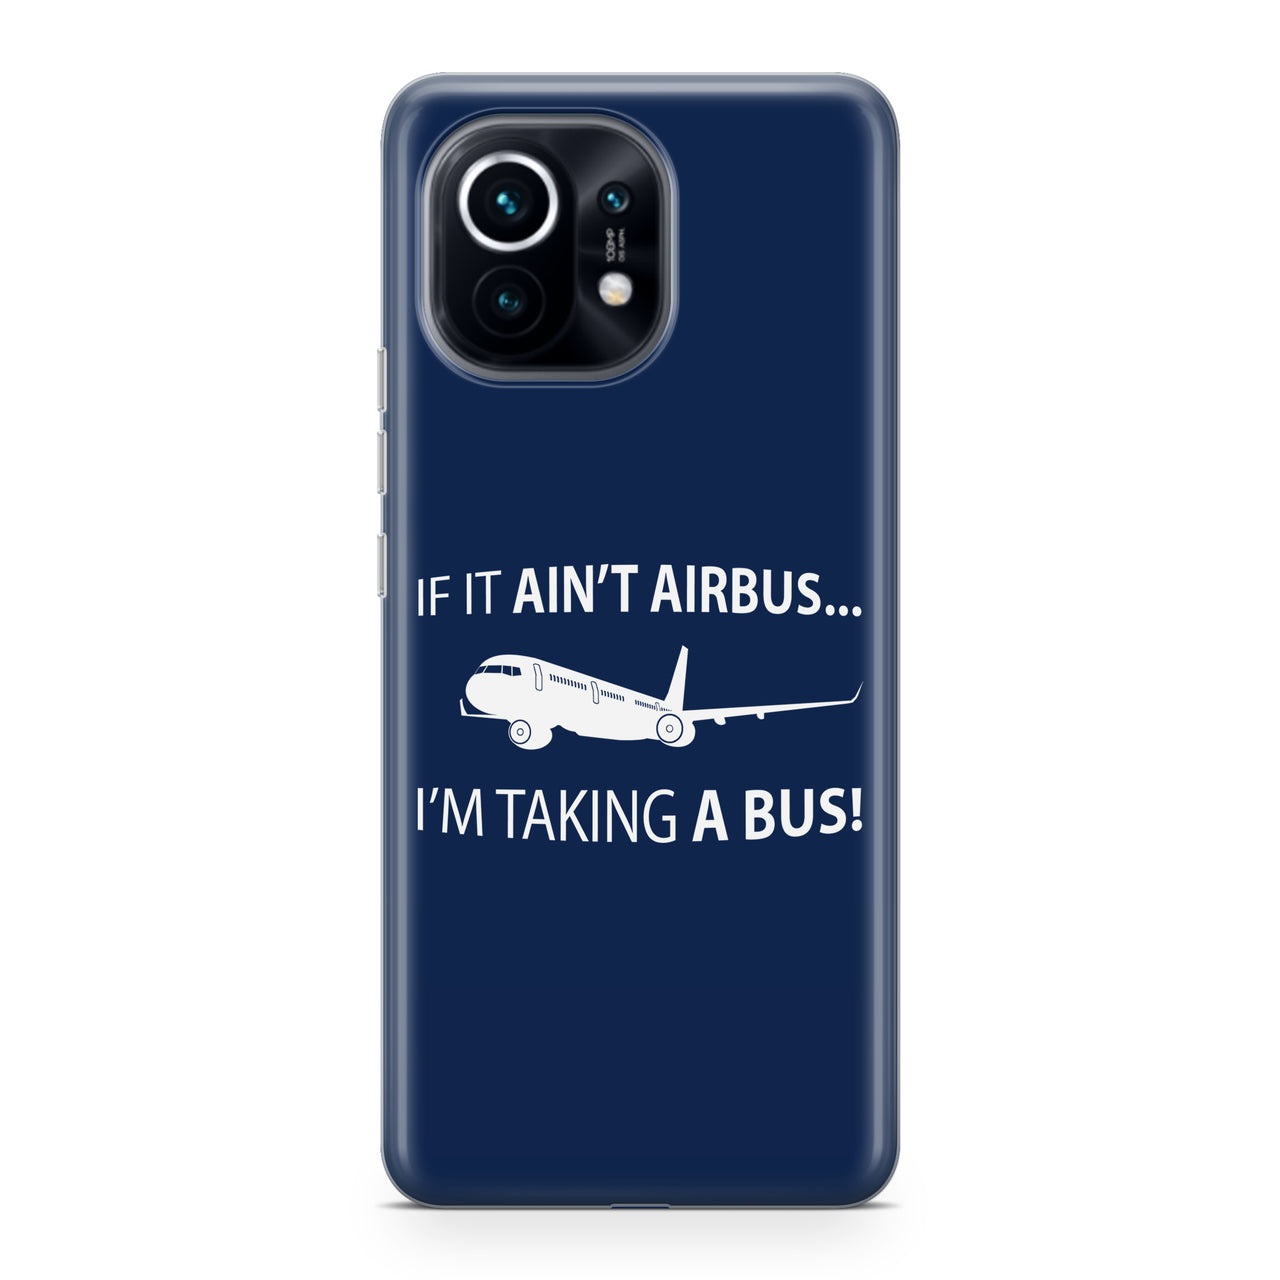 If It Ain't Airbus I'm Taking A Bus Designed Xiaomi Cases